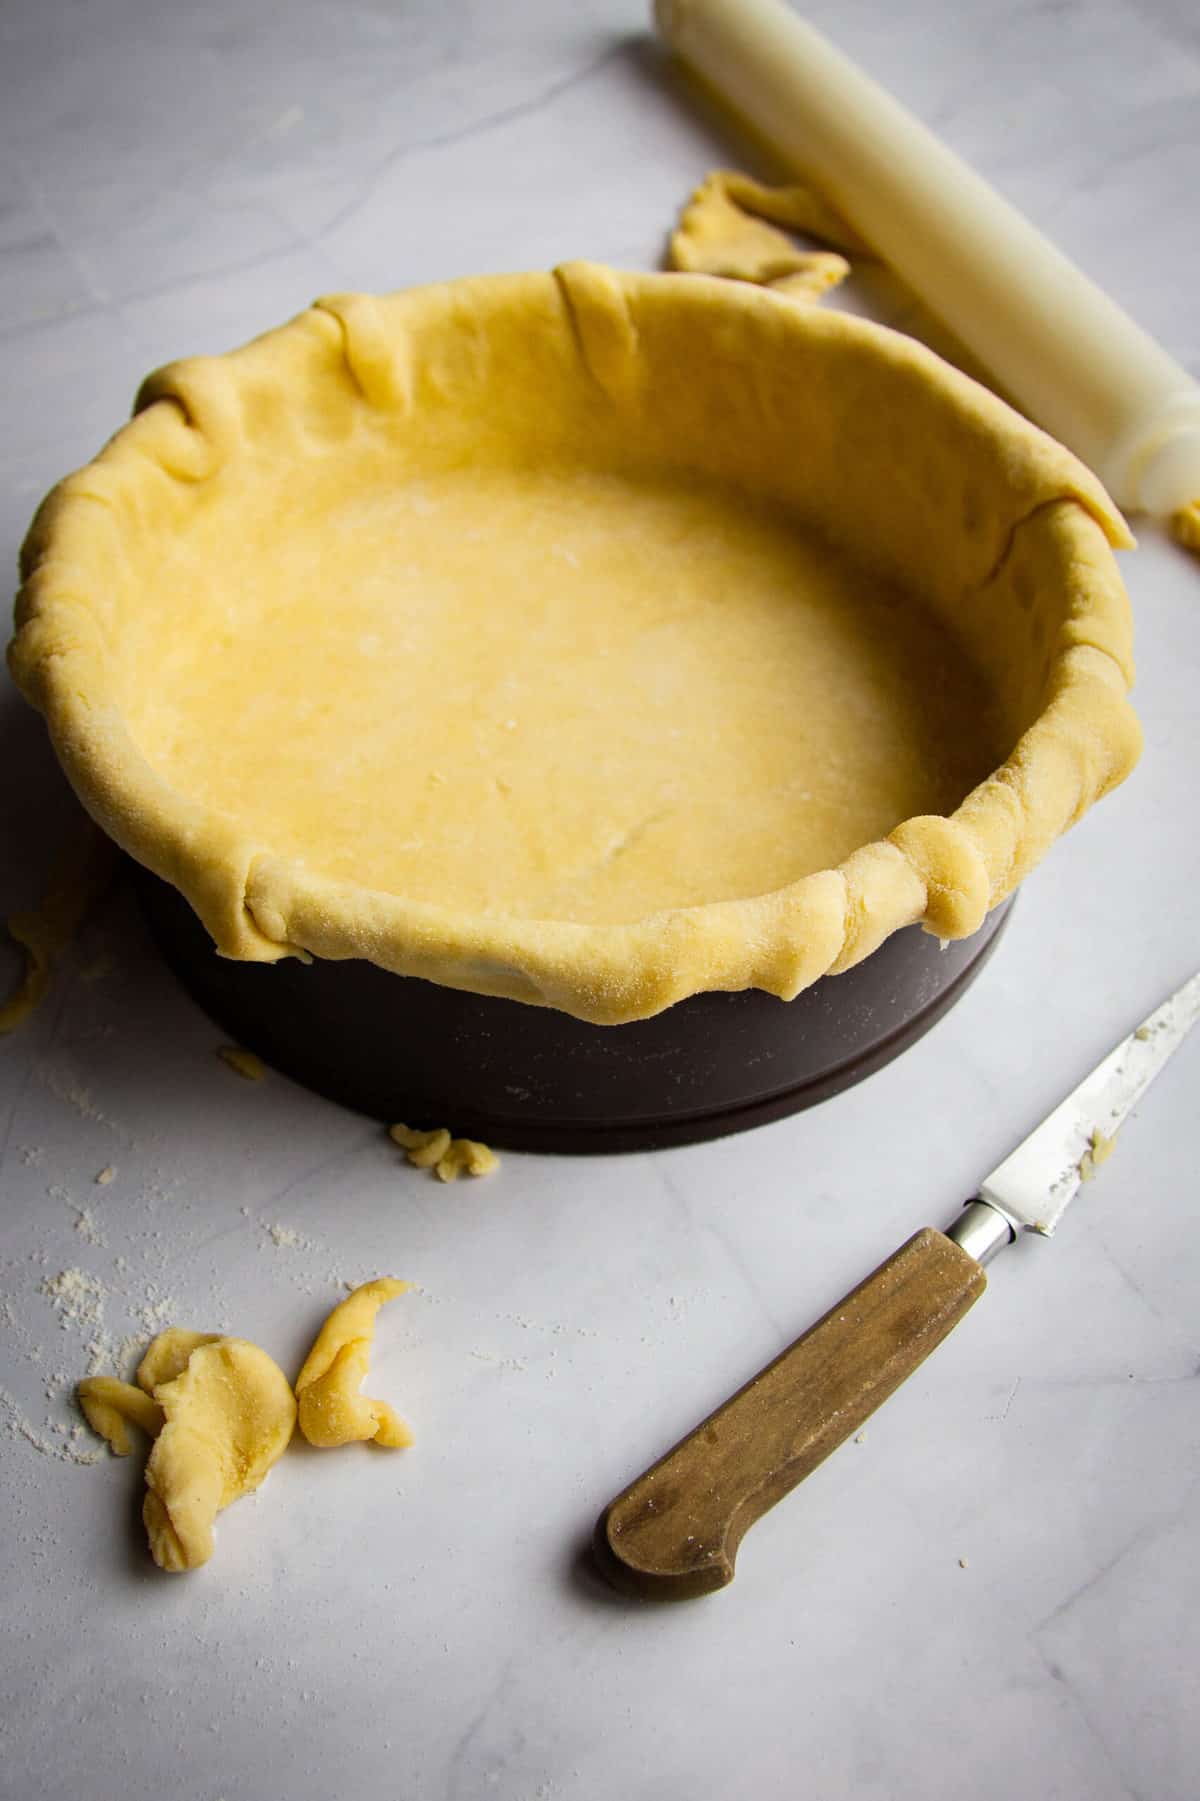 A pie crust rolled into a pie tray with a knife and some pie trim on the side.